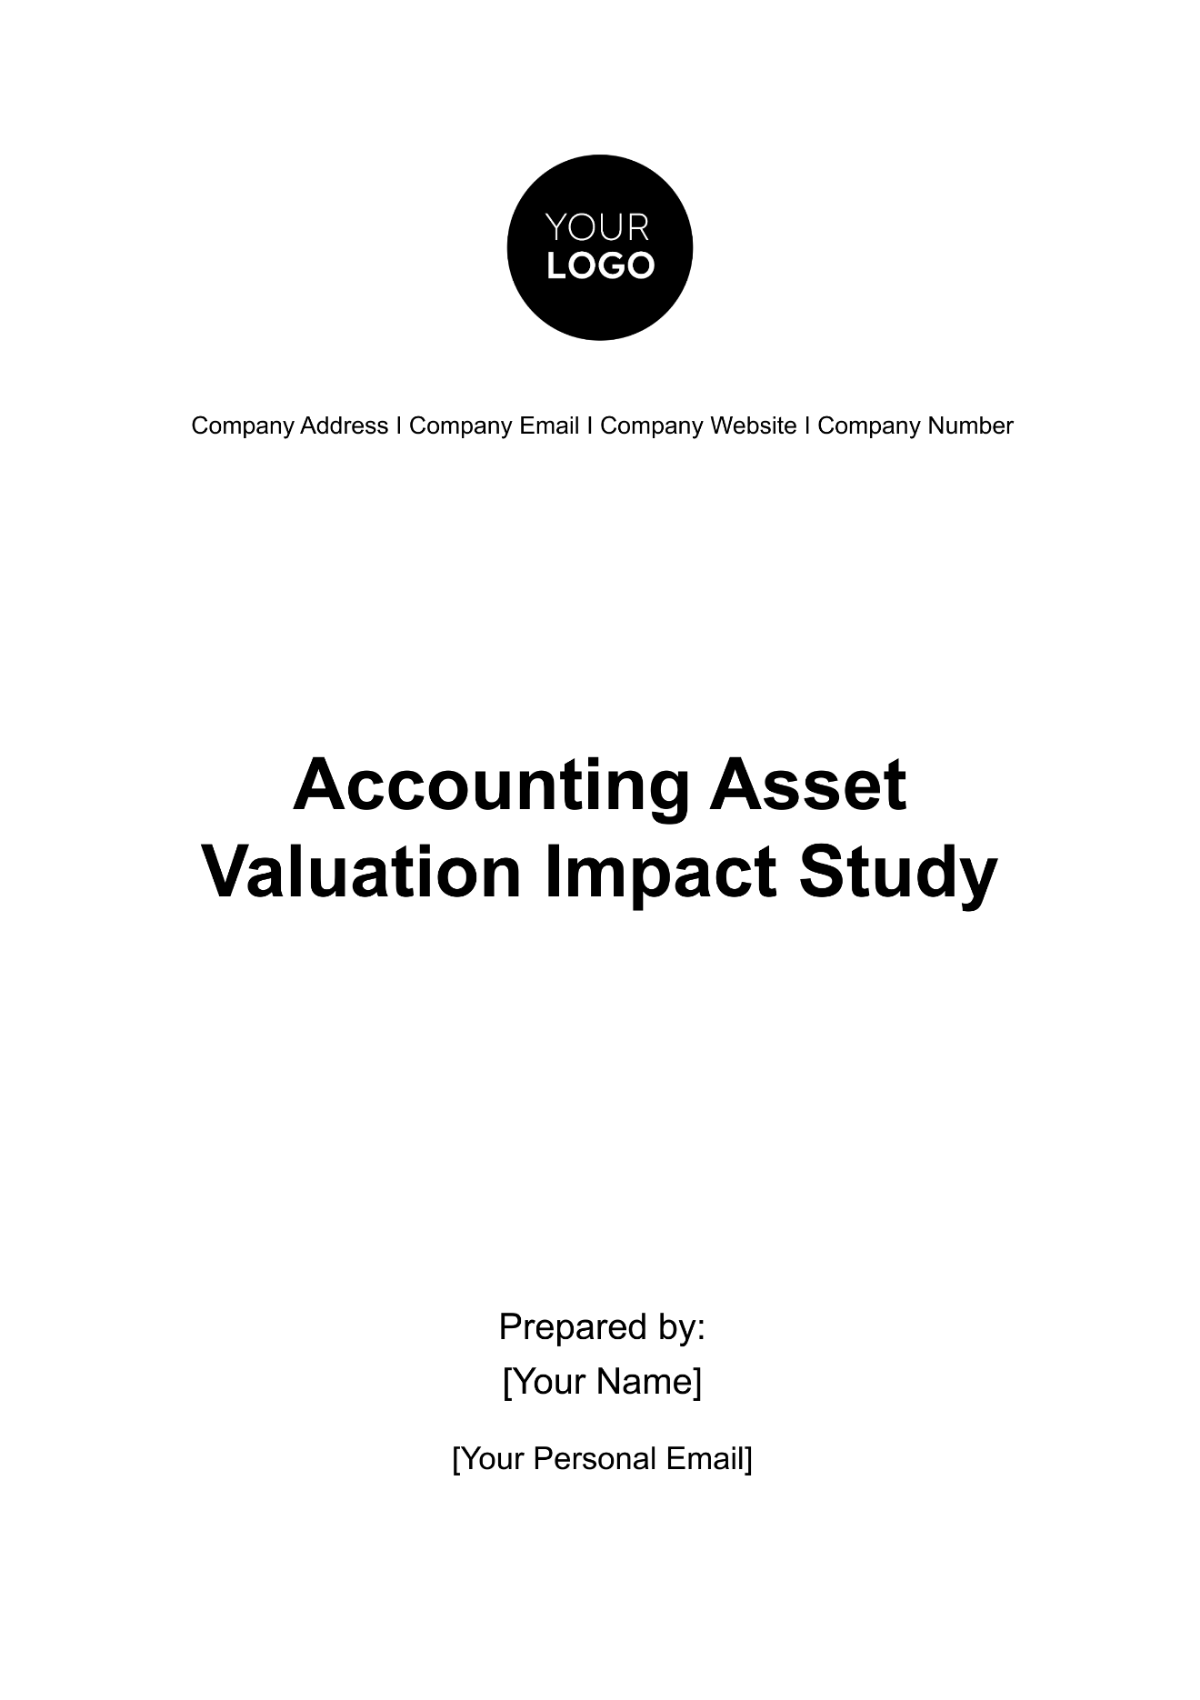 Accounting Asset Valuation Impact Study Template